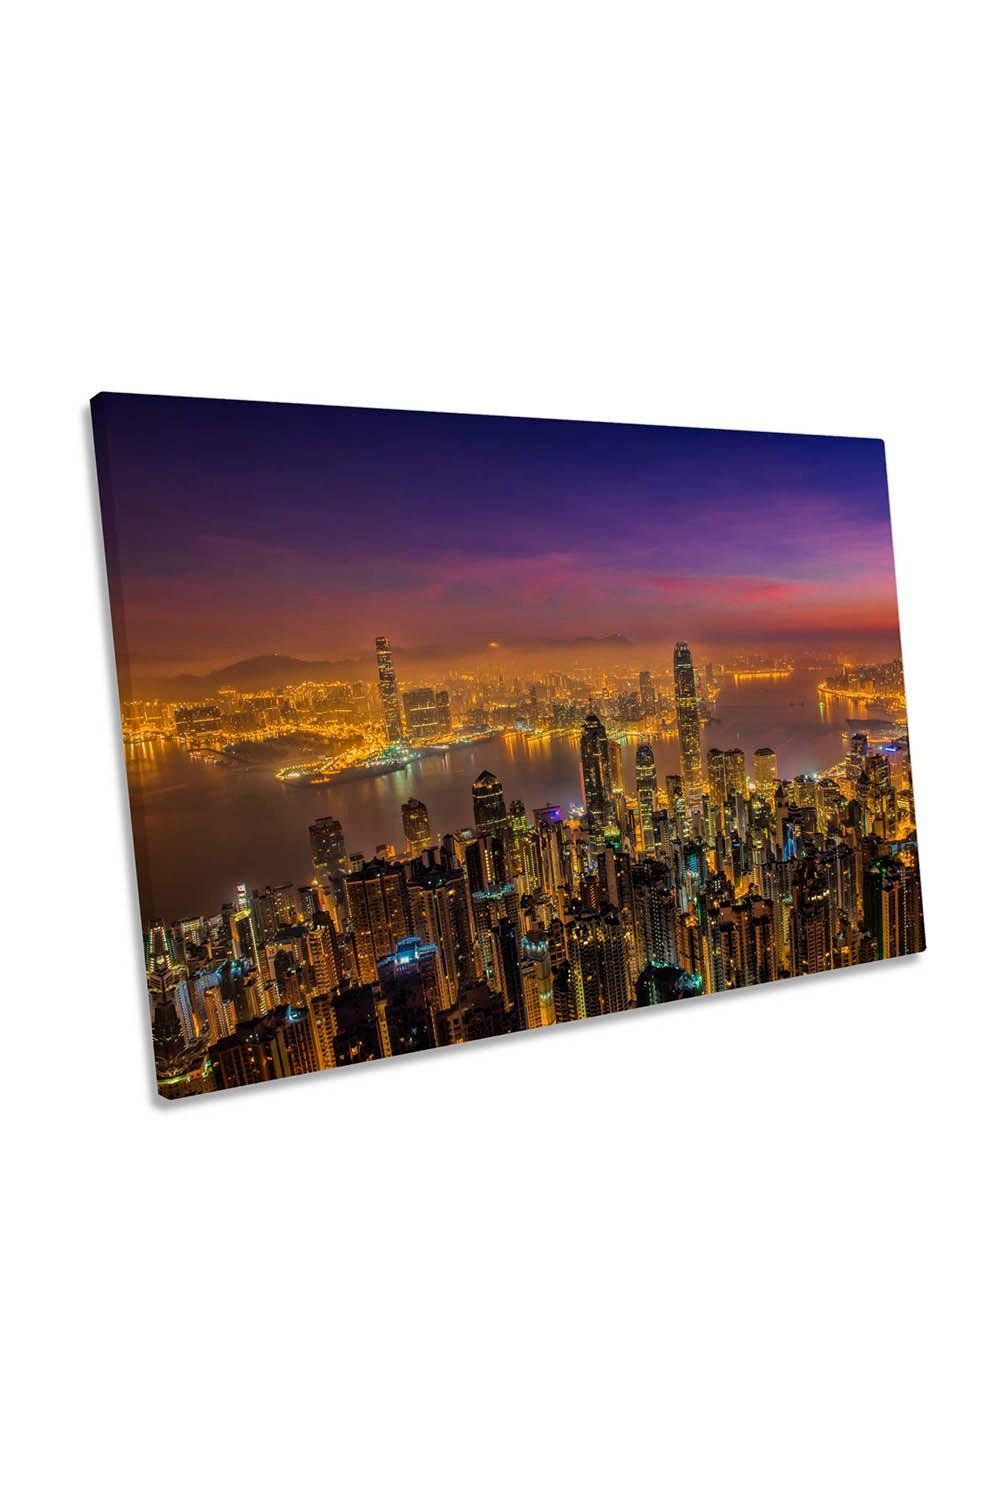 Hong Kong City Sunset Asia Cityscape Canvas Wall Art Picture Print